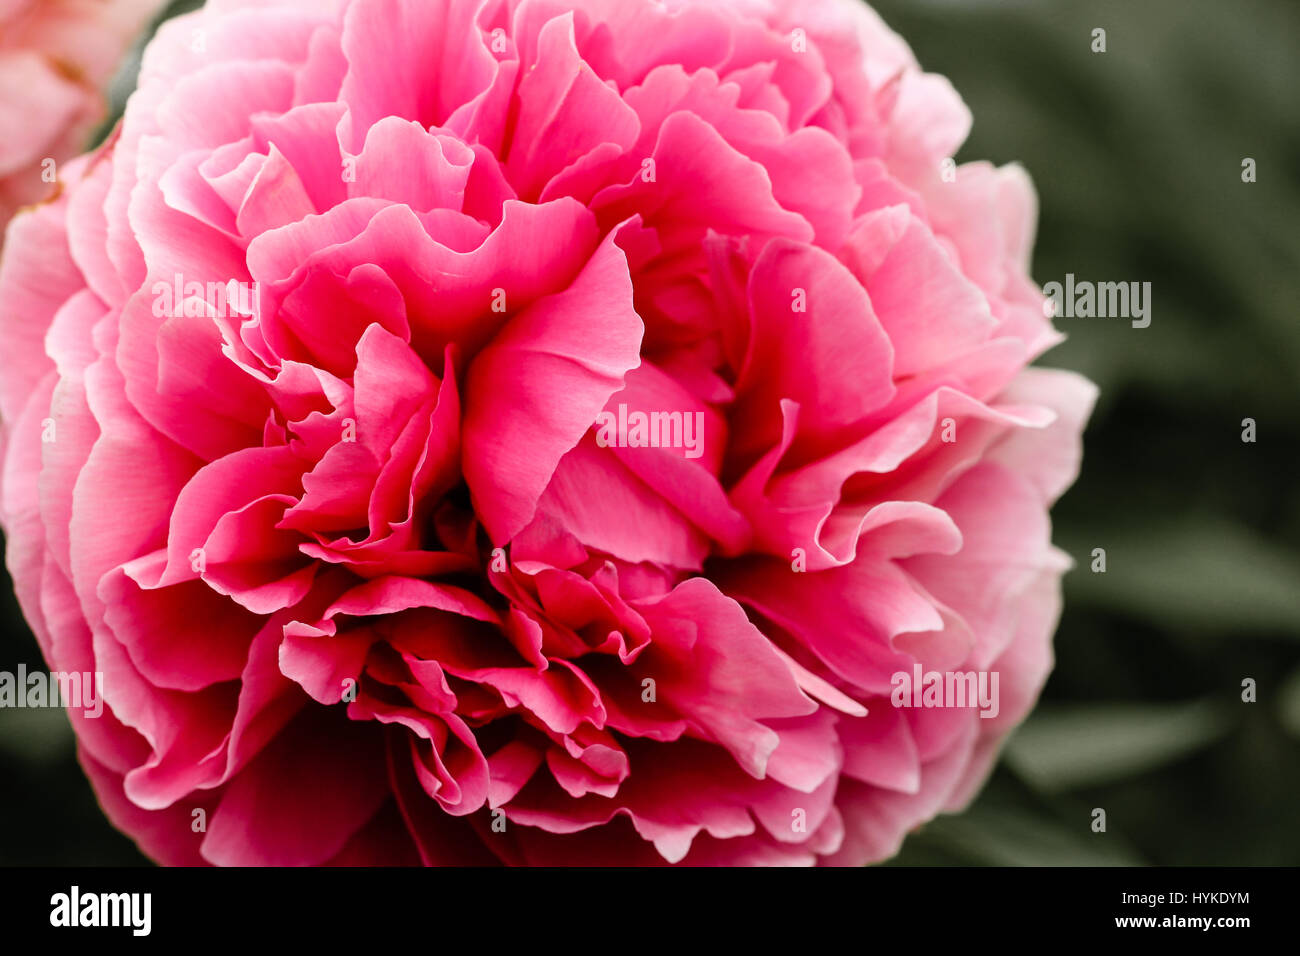 Looking into the large head of a showy, flowering pink peony against a neutral background. Stock Photo